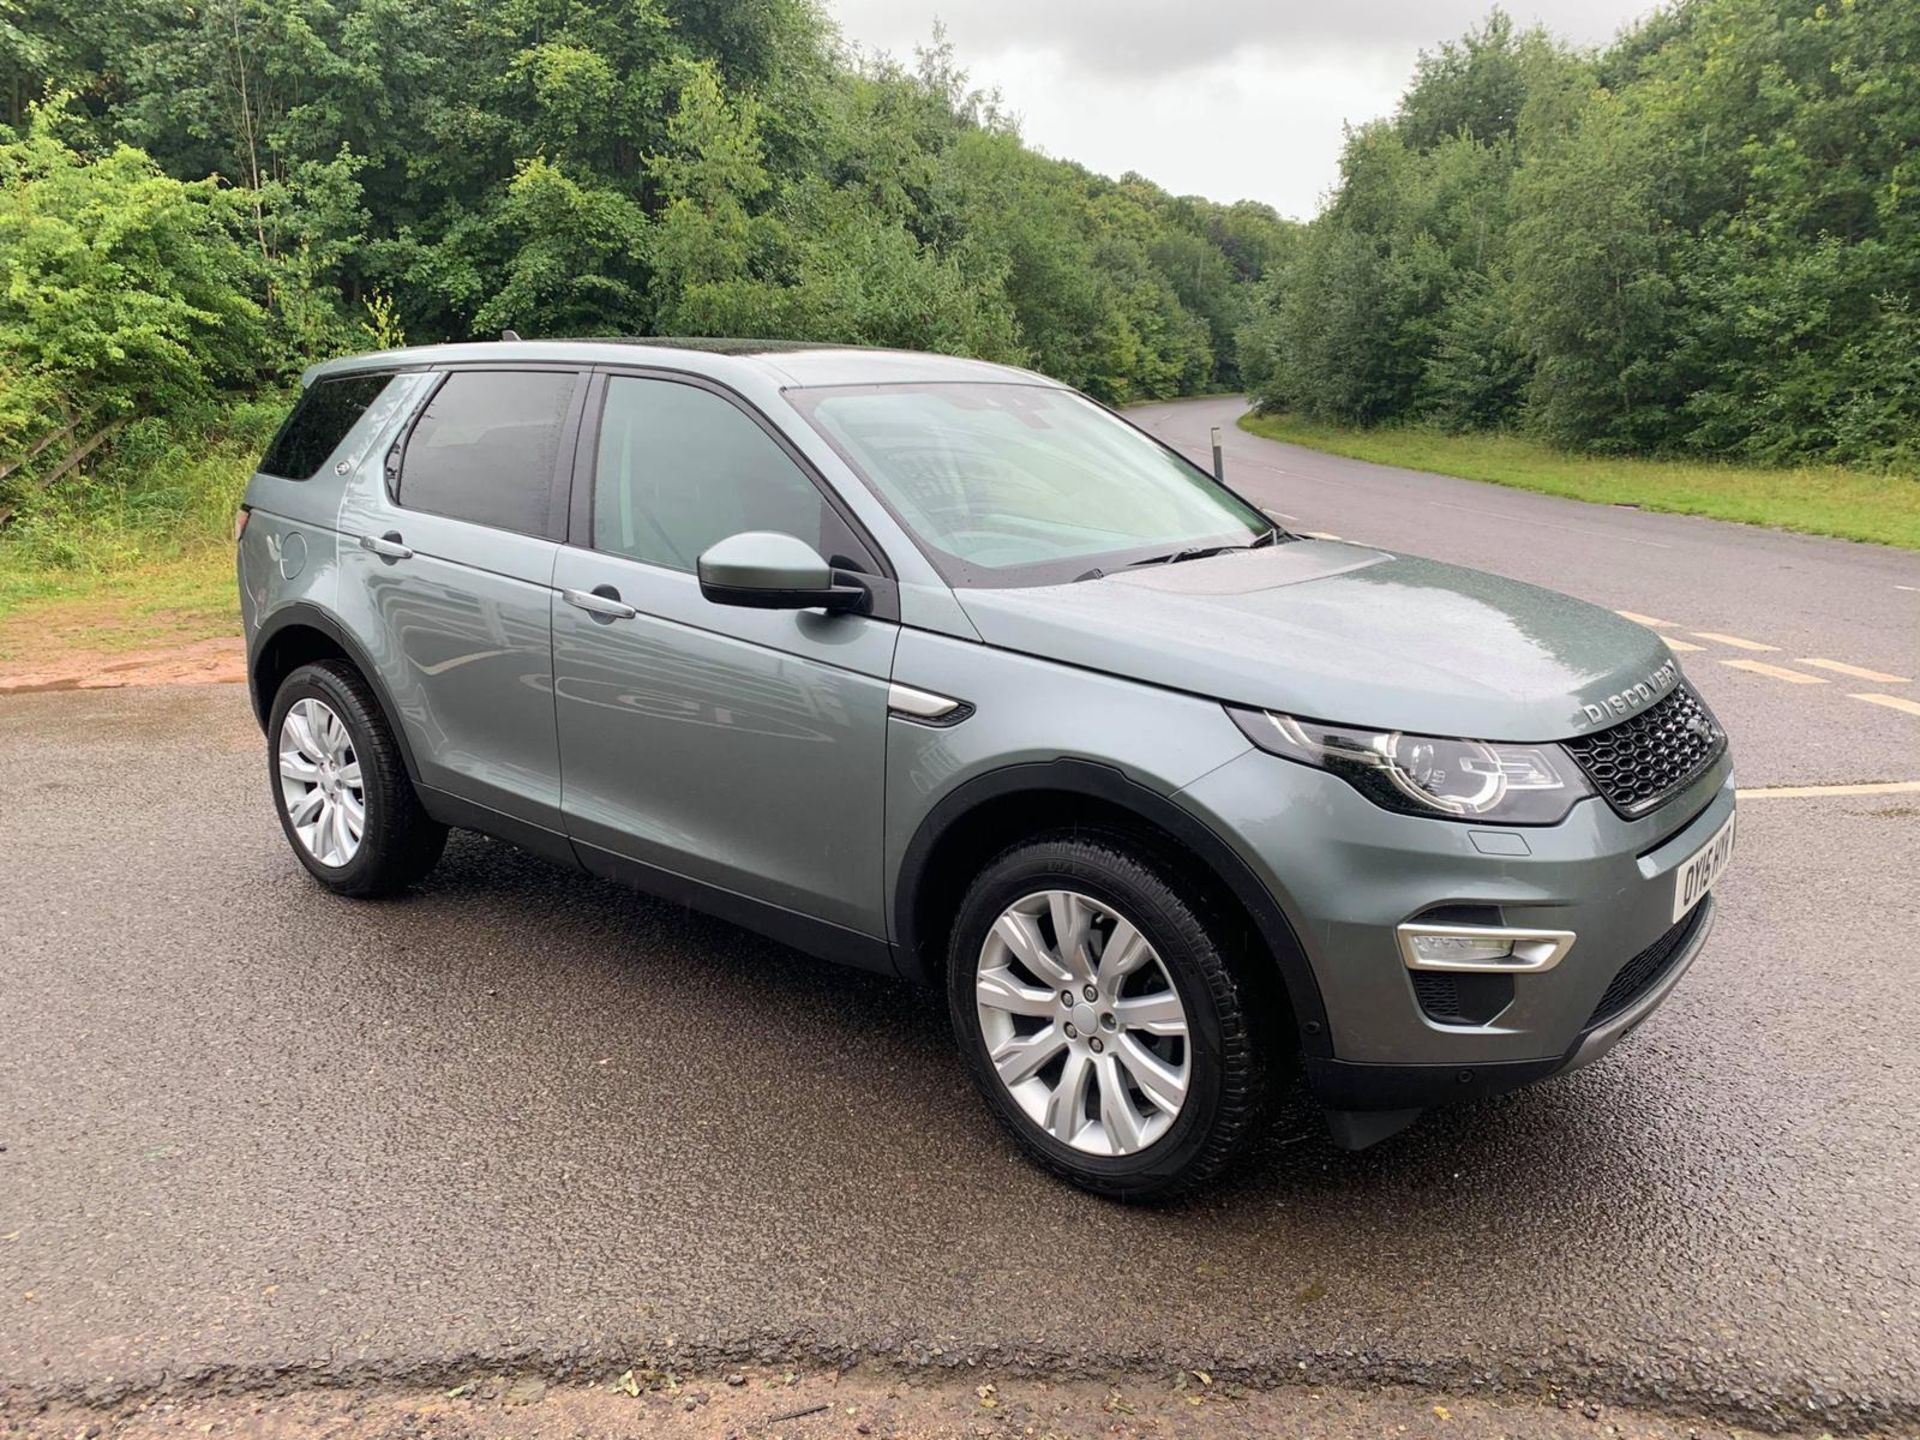 2015/15 REG LAND ROVER DISCOVERY SPORT SD4 HSE LUXURY 2.2 DIESEL AUTOMATIC, SHOWING 2 FORMER KEEPERS